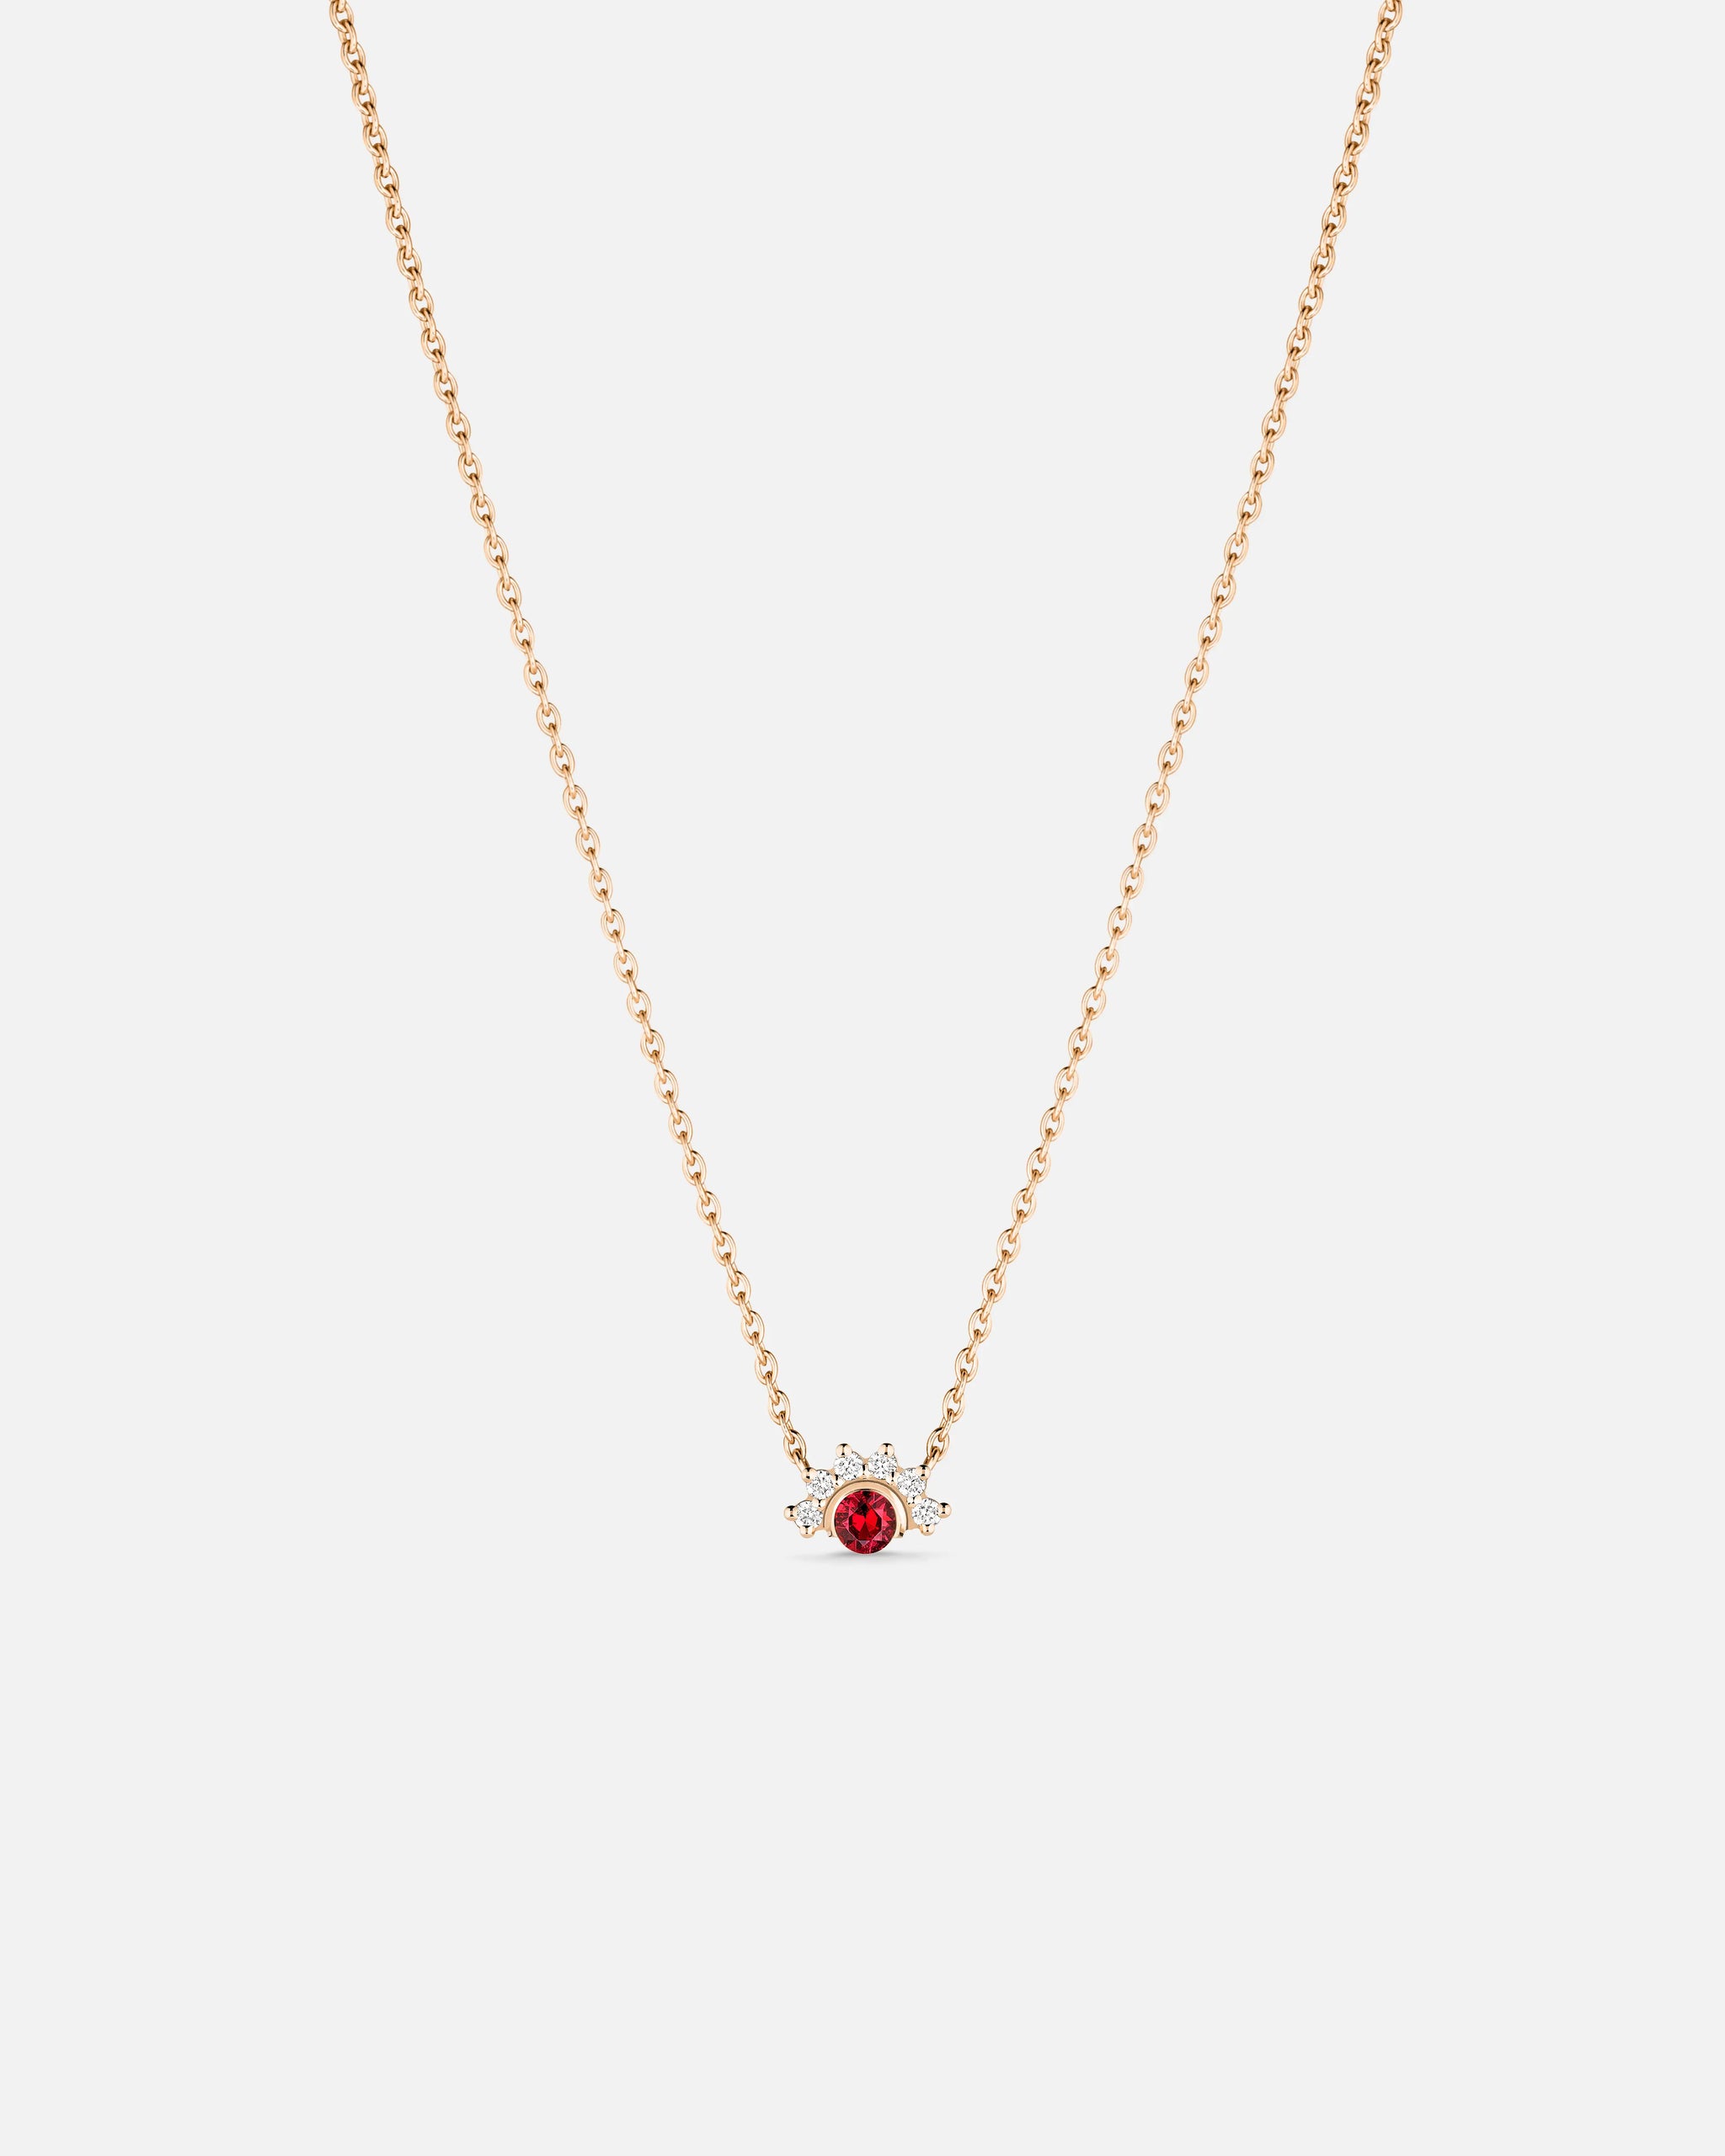 Red Spinel Pendant in Rose Gold - 1 - Nouvel Heritage